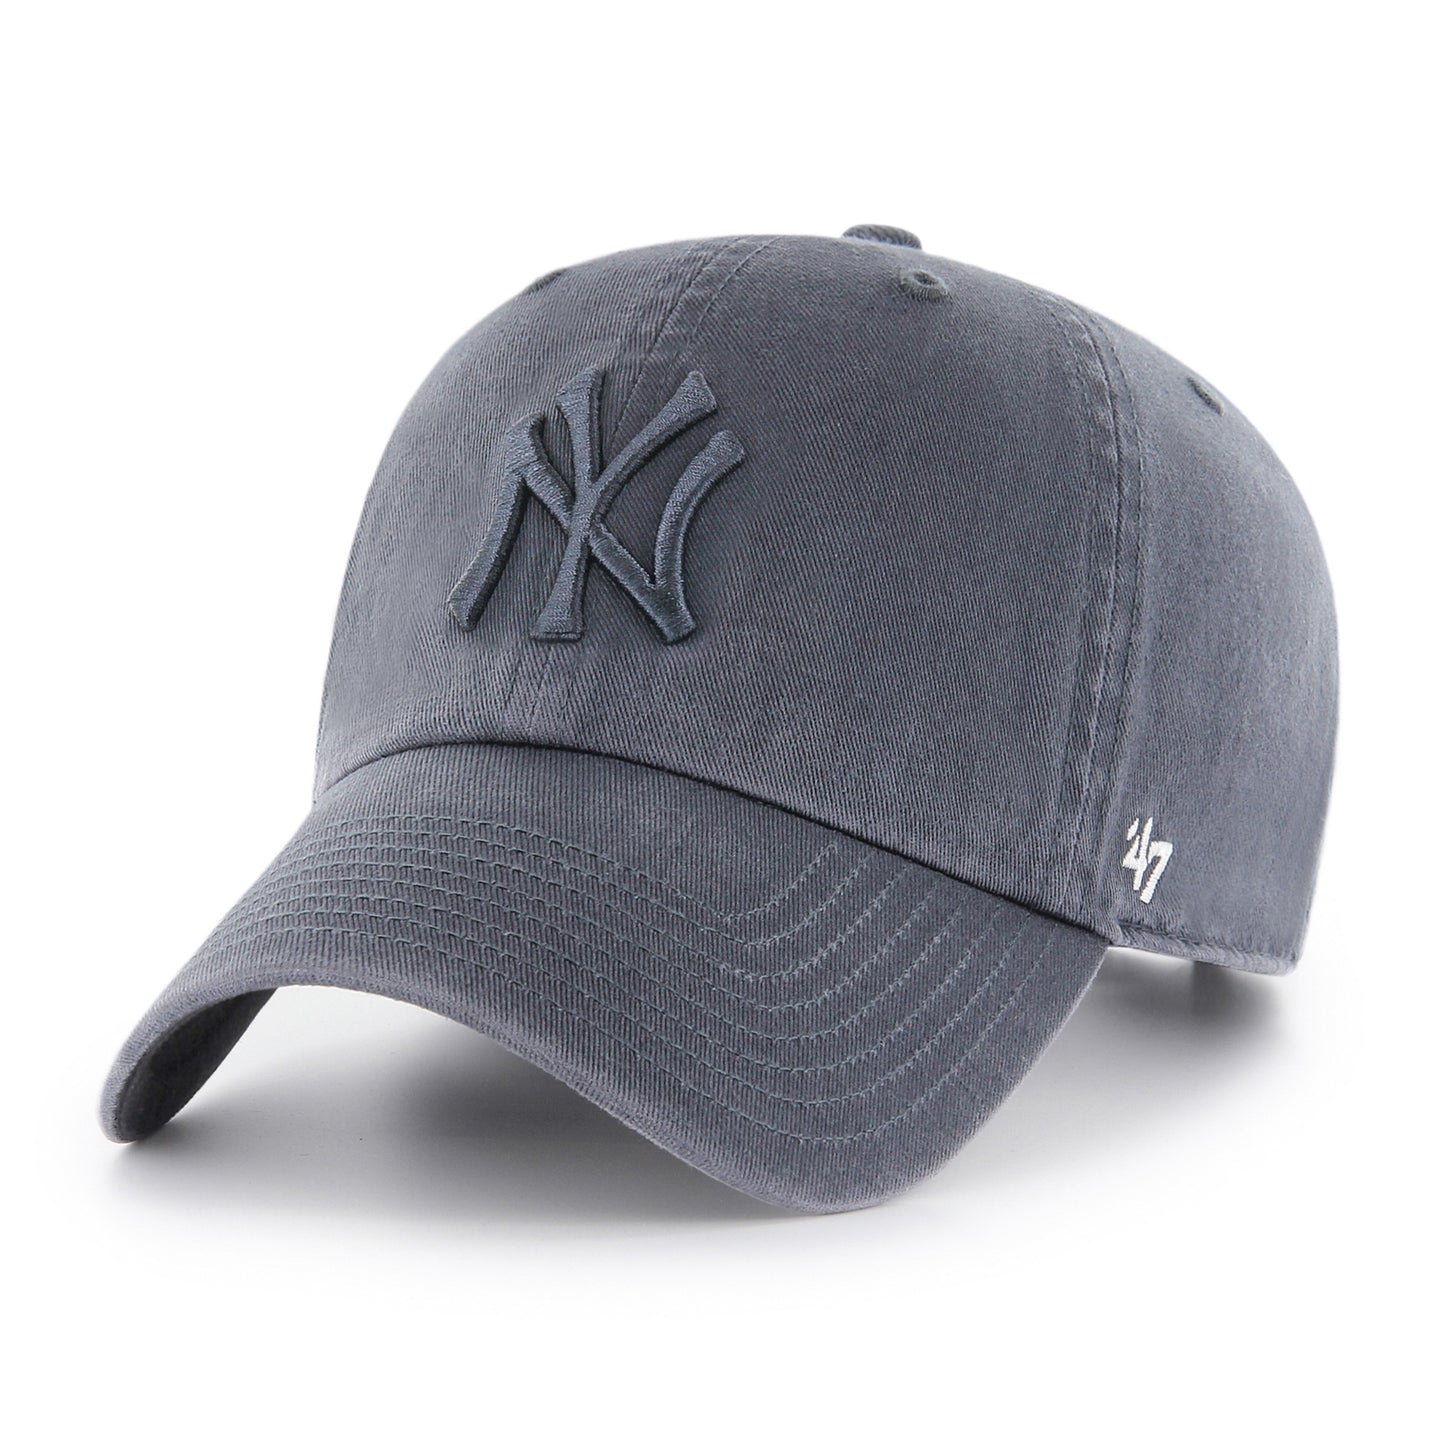 CASQUETTE CLEAN UP MLB YANKEES VINTAGE NAVY